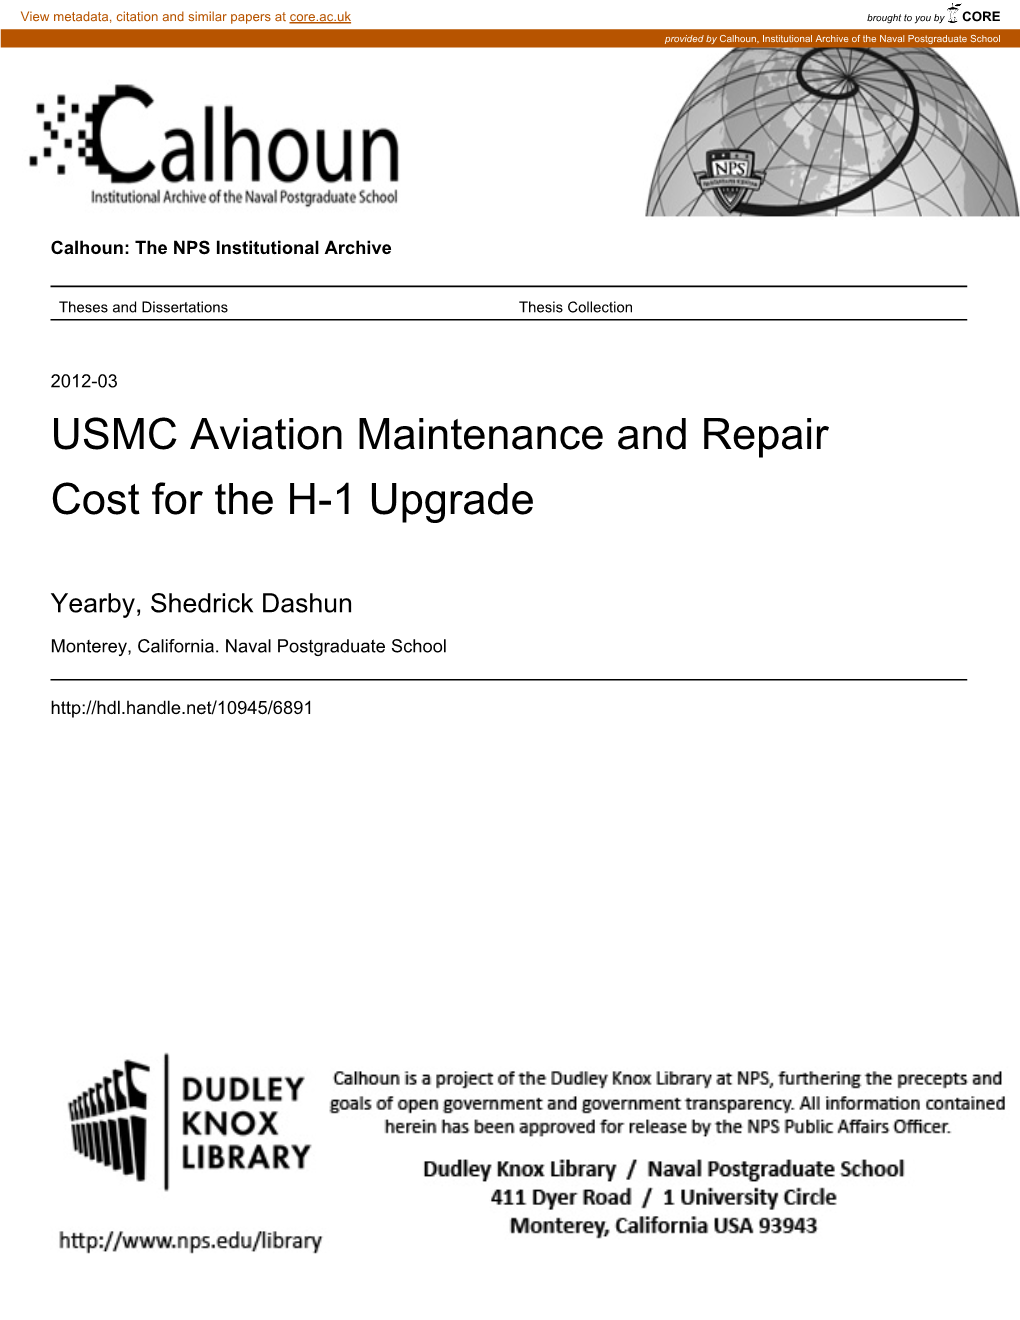 USMC Aviation Maintenance and Repair Cost for the H-1 Upgrade